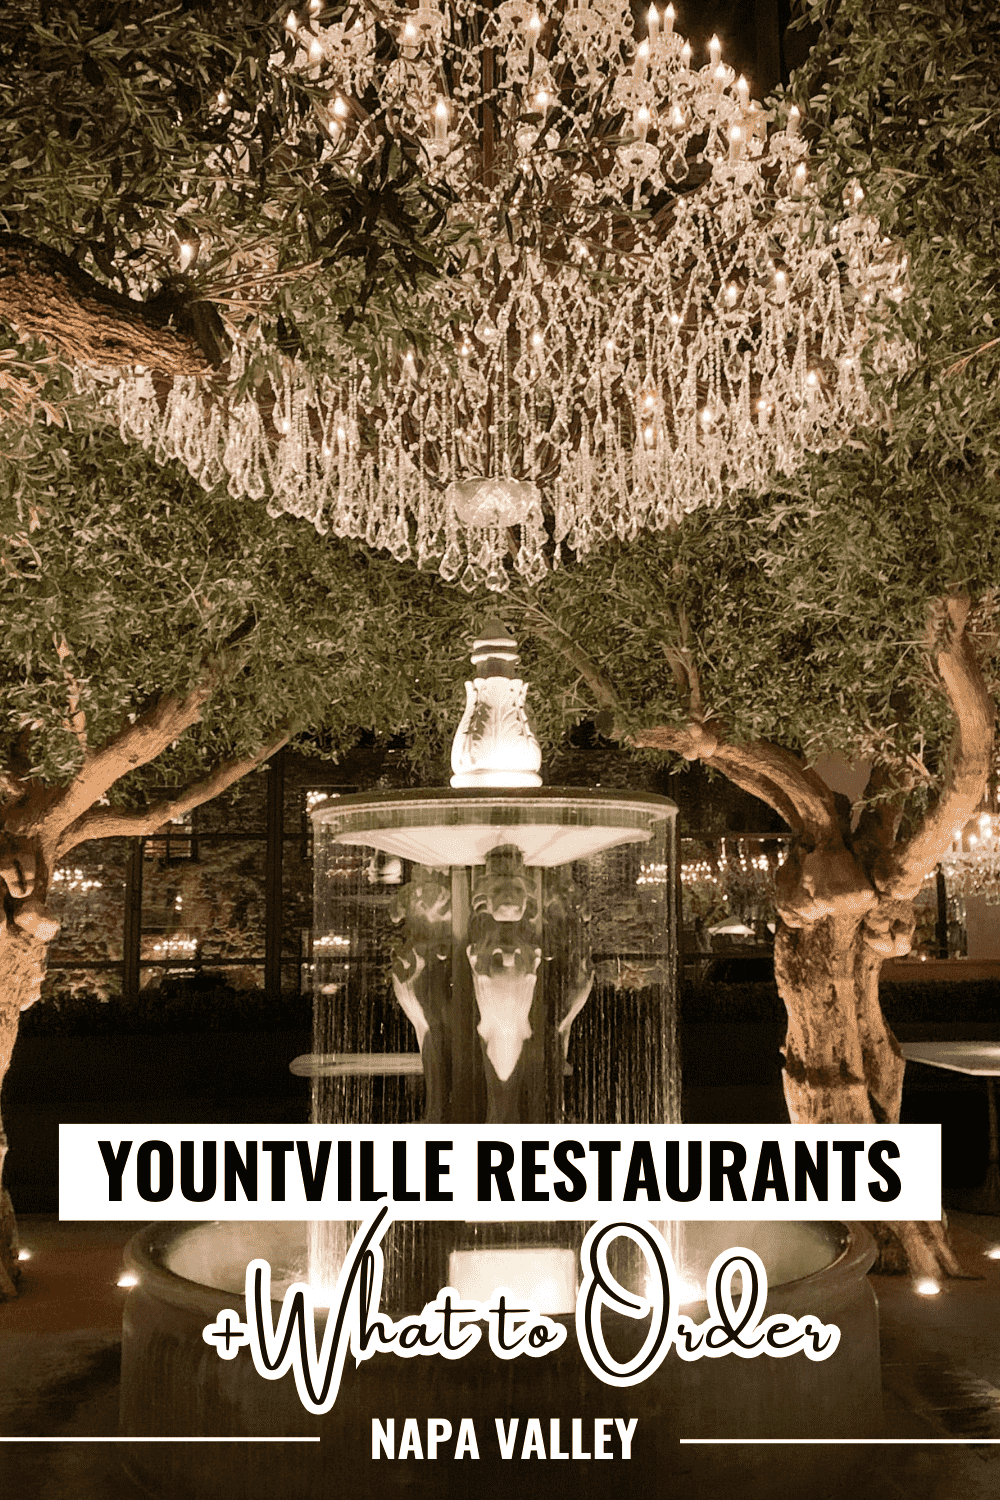 Yountville Restaurants and What to Order, Napa Valley